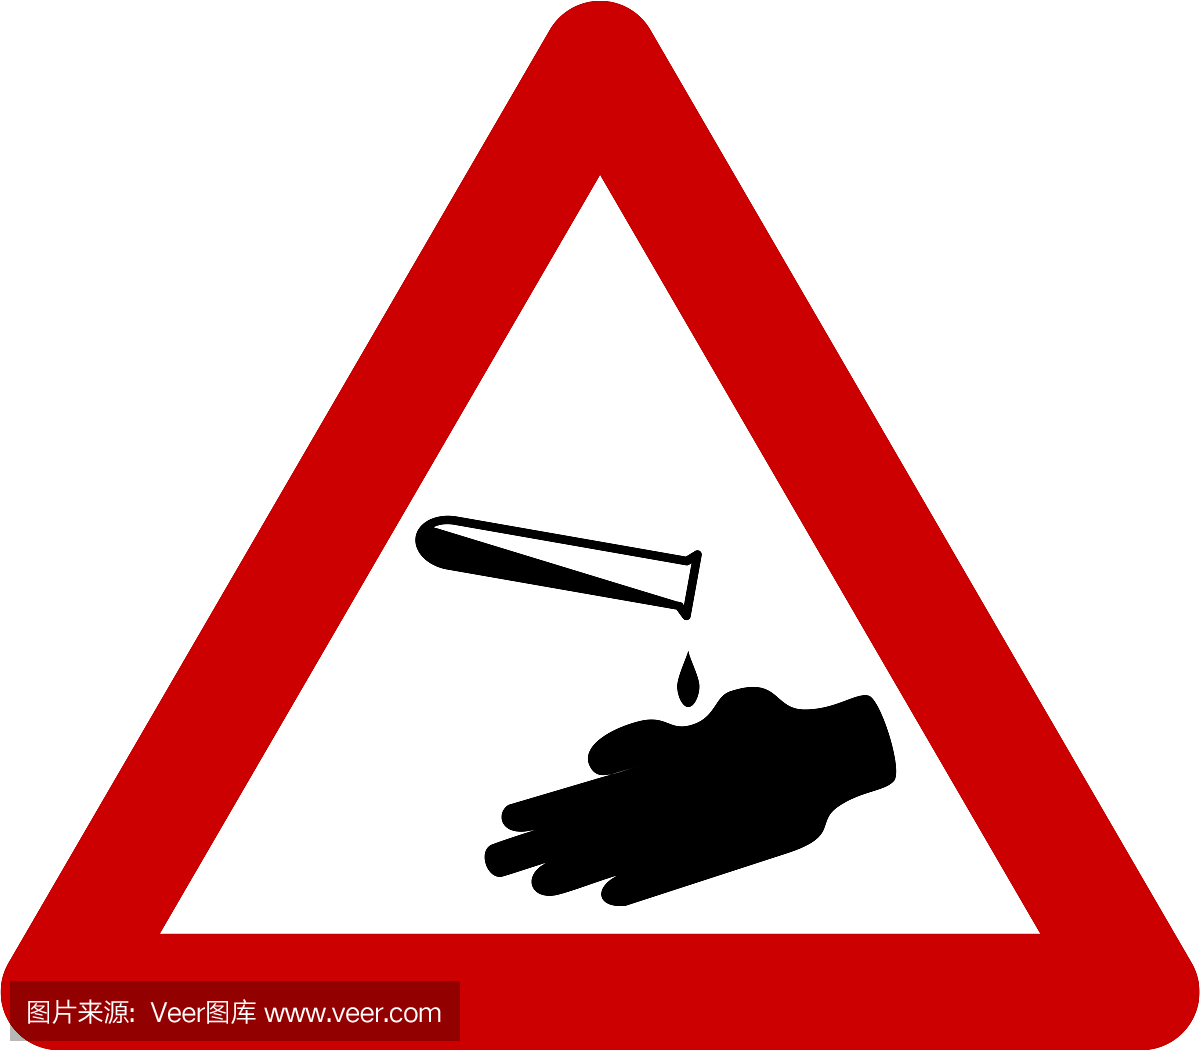 Warning sign with corrosive substances symbo